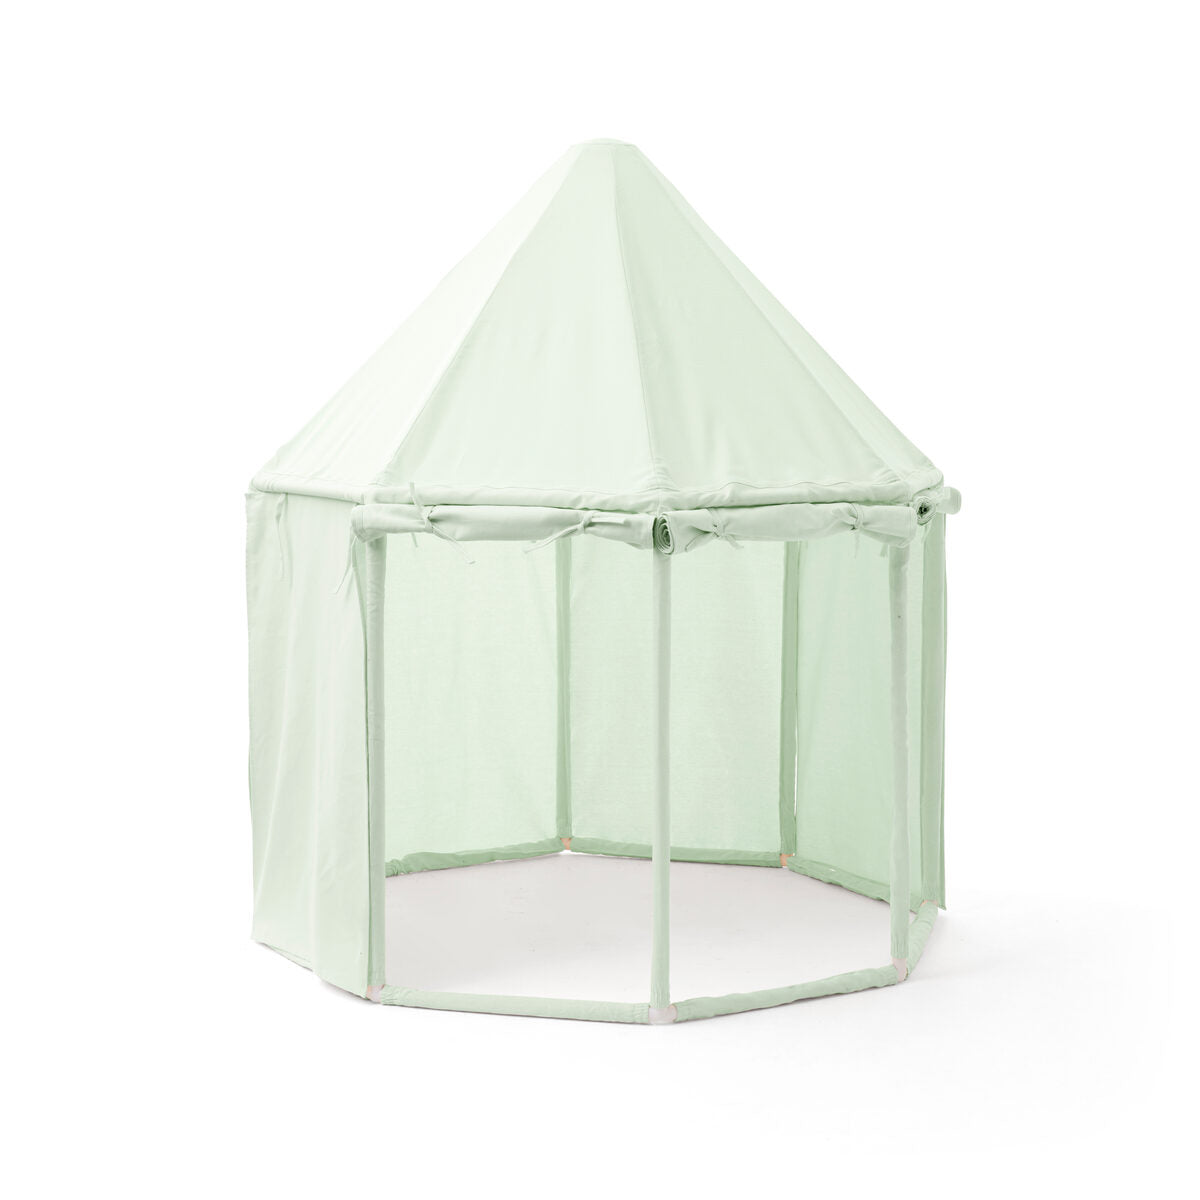 Kids Concept Pavilion Tent (up to 10 years) - Light Green